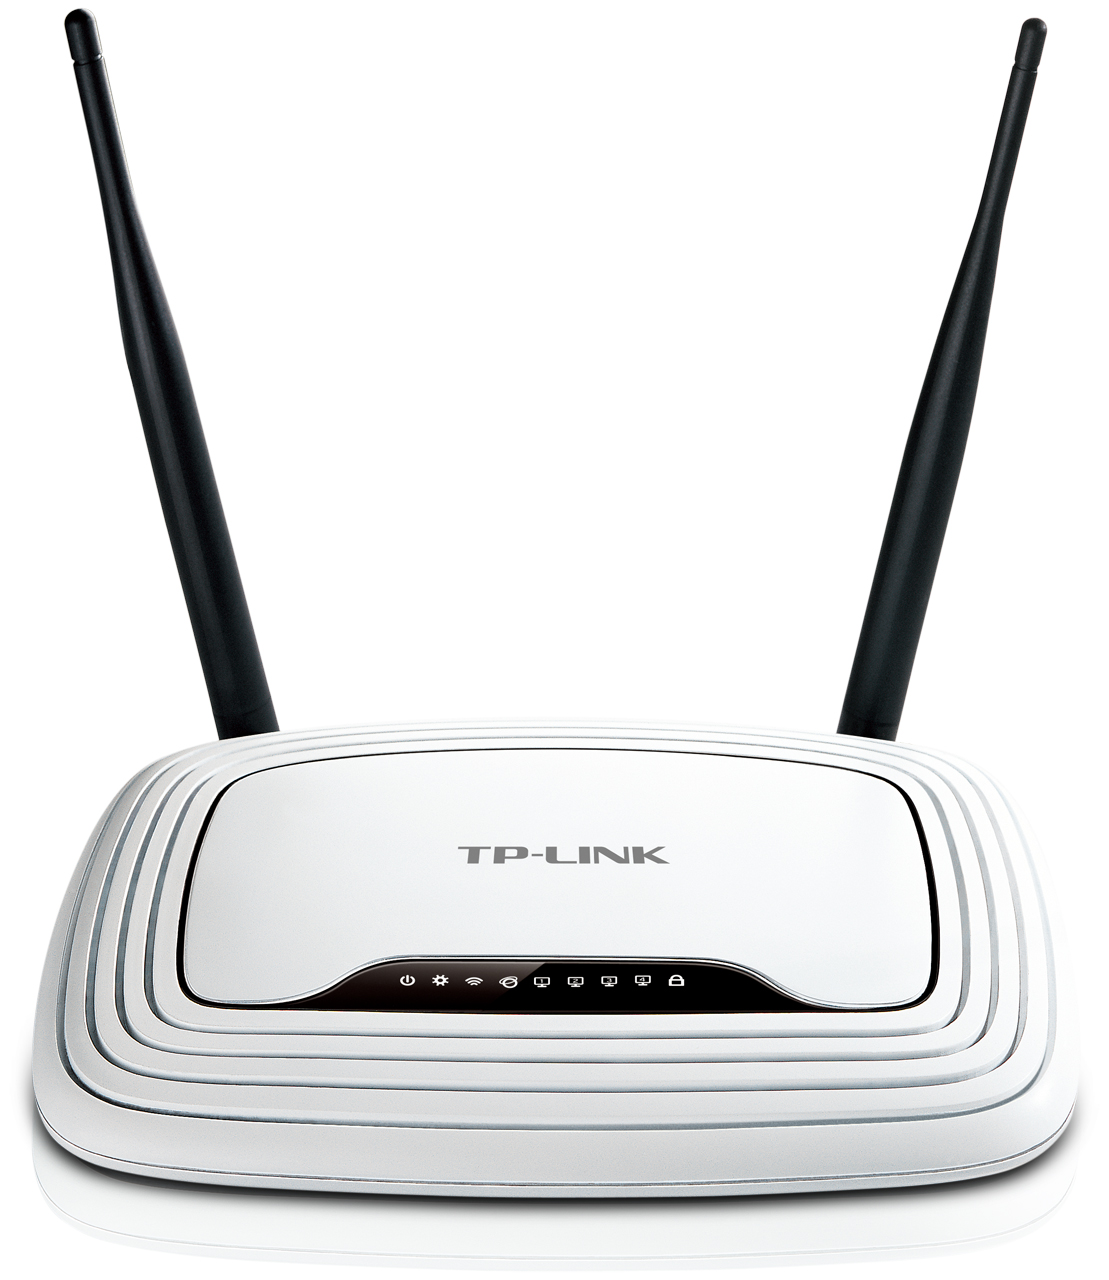 Hard reset TP-LINK TL-WR24N - How to Hard Reset Your Router